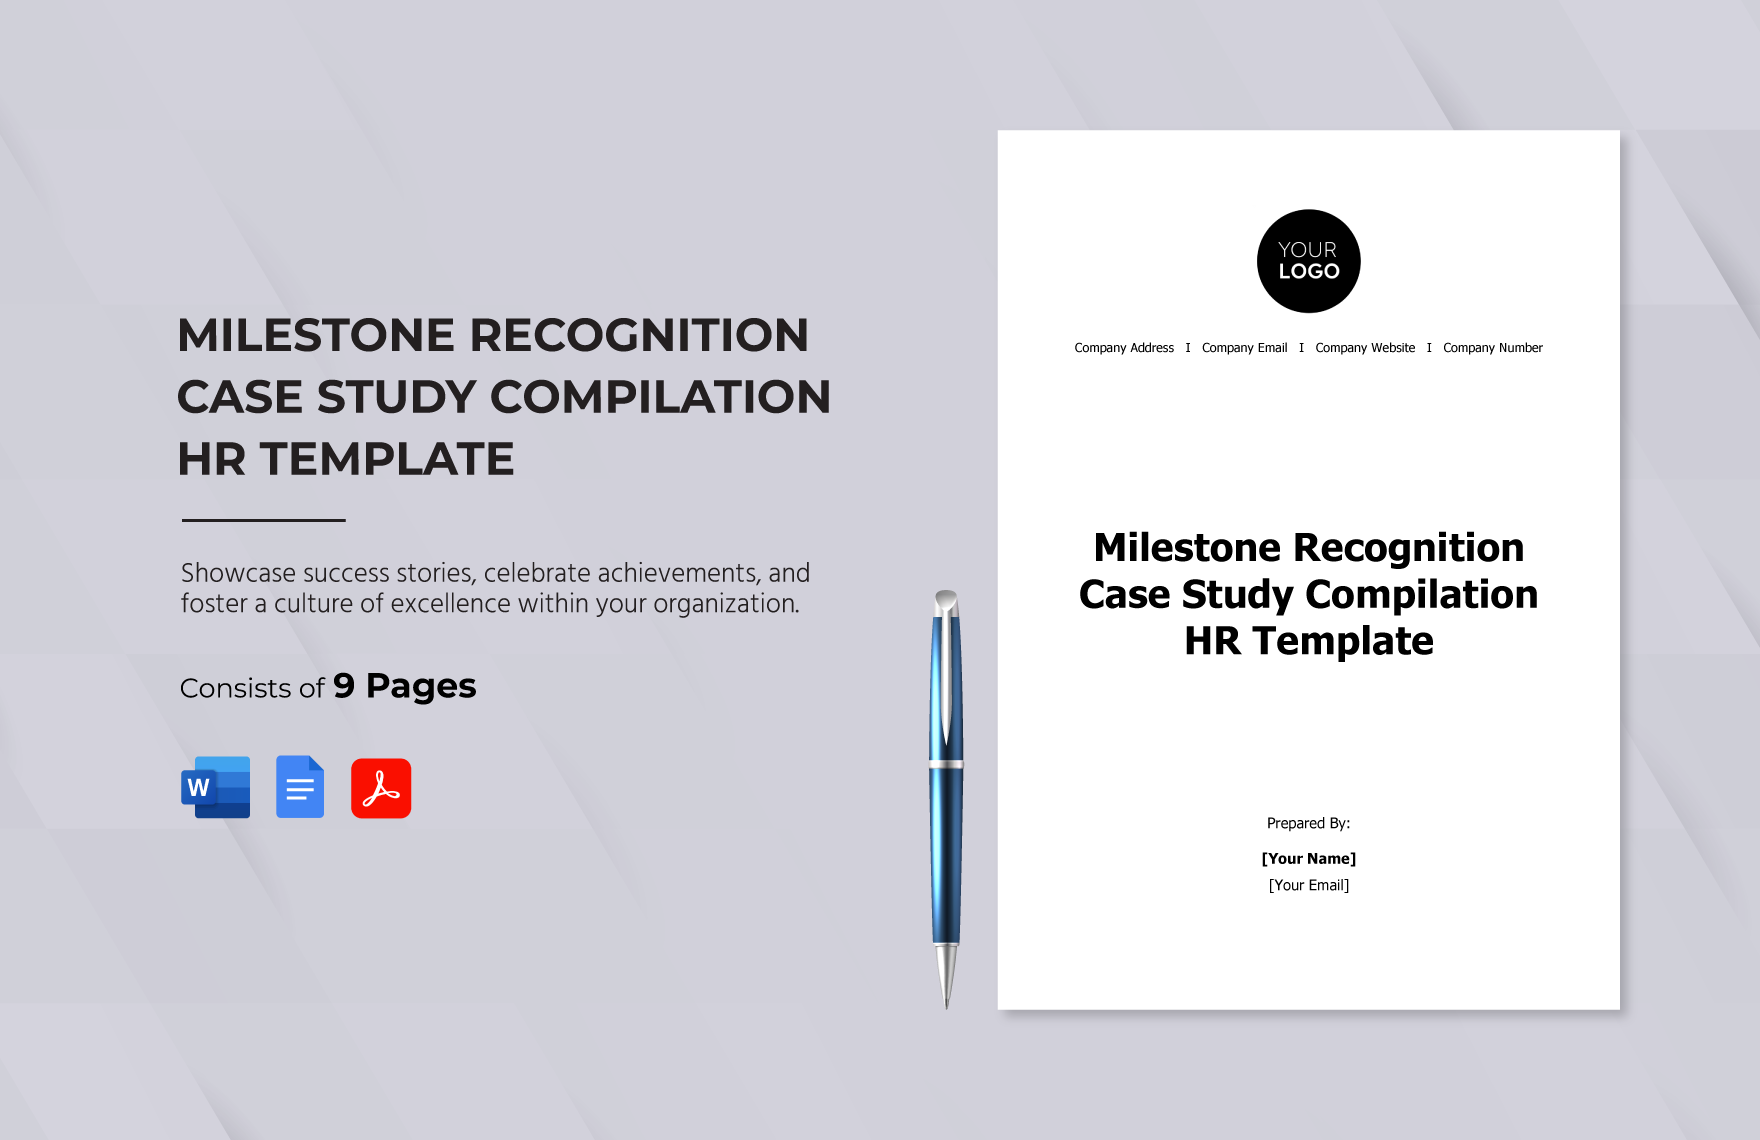 Milestone Recognition Case Study Compilation HR Template in Word, Google Docs, PDF